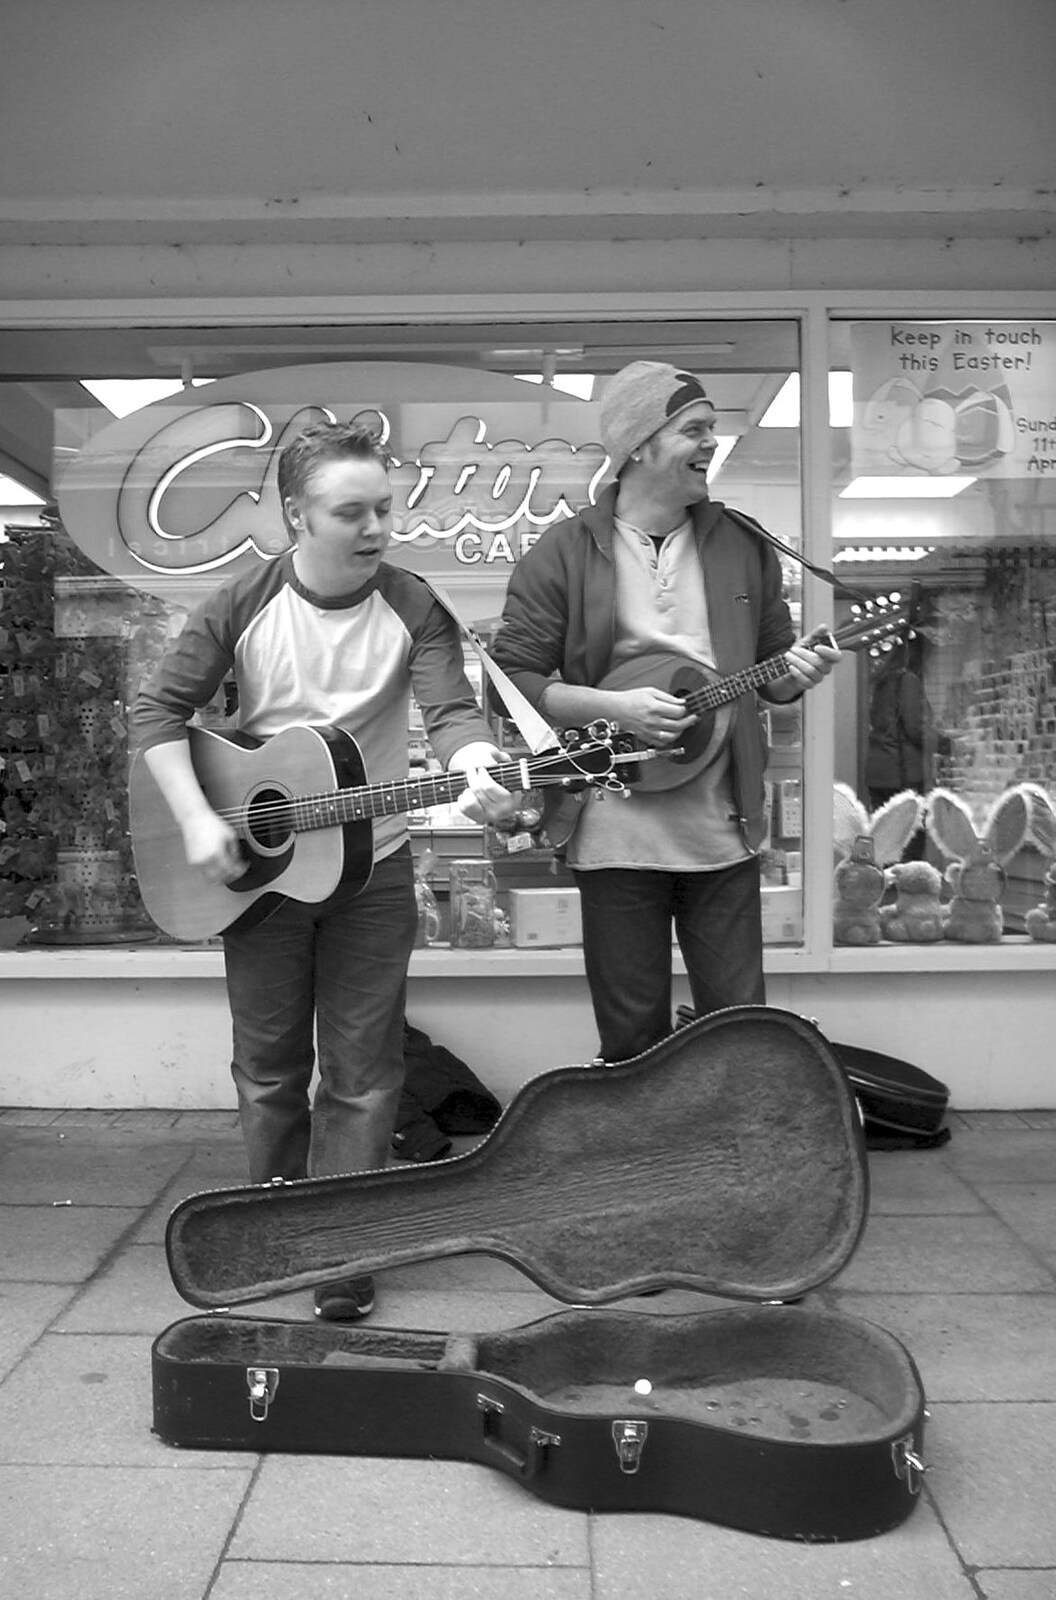 Liam and Ian outside Clinton's Cards in Diss from Moping in Southwold, Suffolk - 3rd April 2004